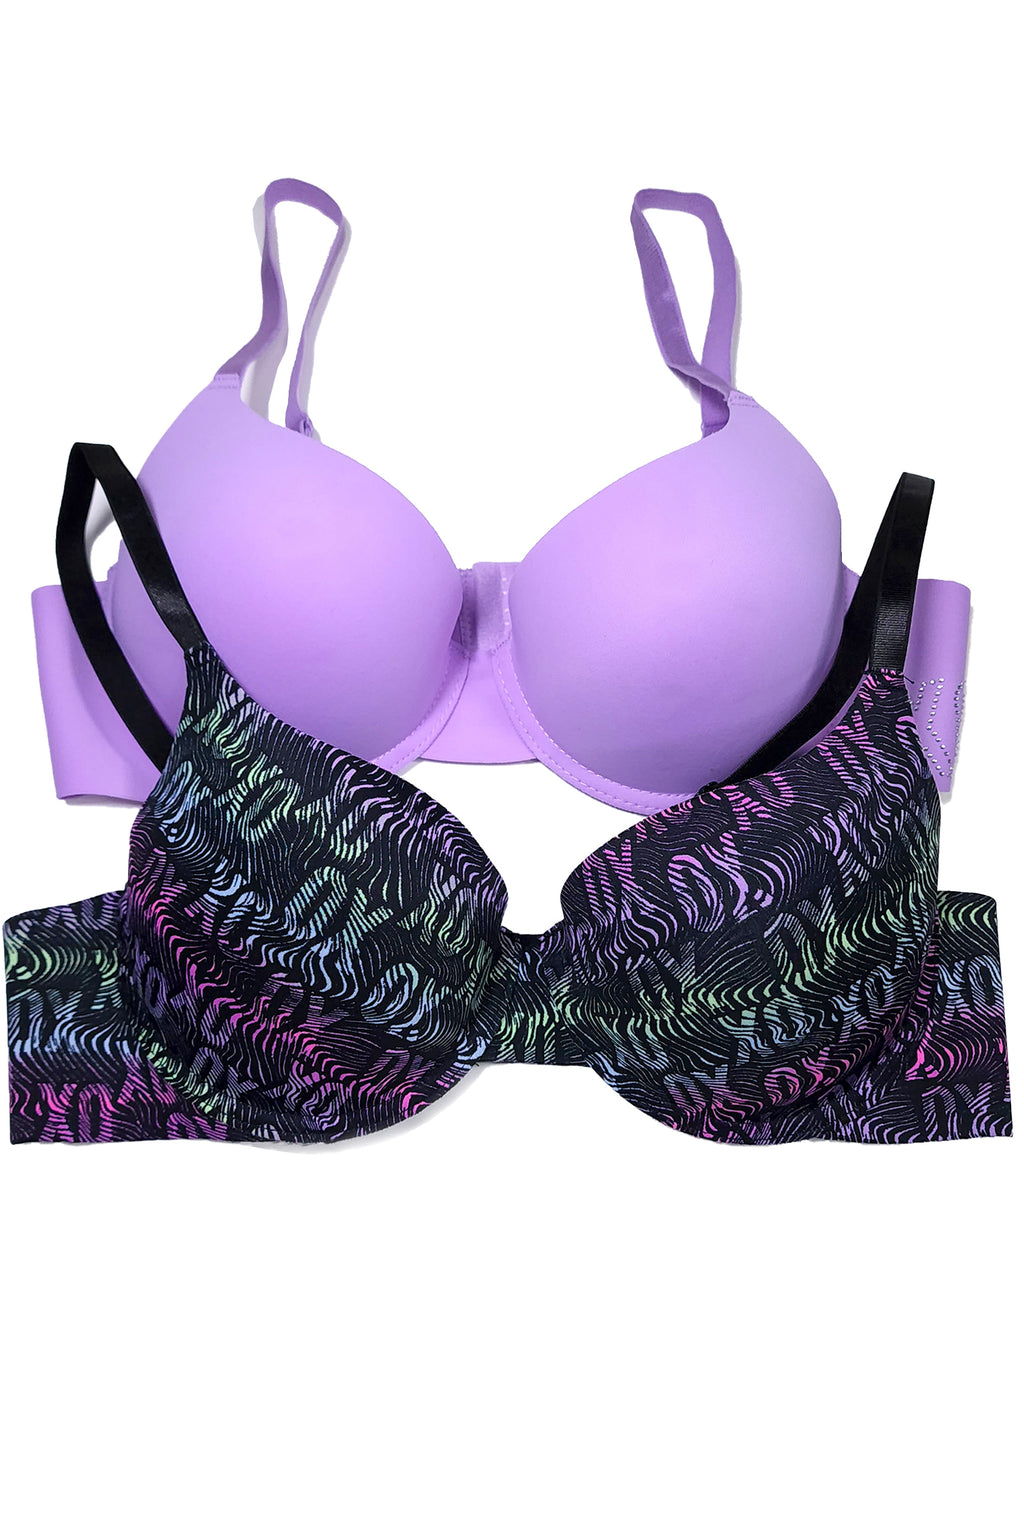 XOXO Tie Dye Push Up Bra 34C Pink Size 34 C - $19 (24% Off Retail) - From L